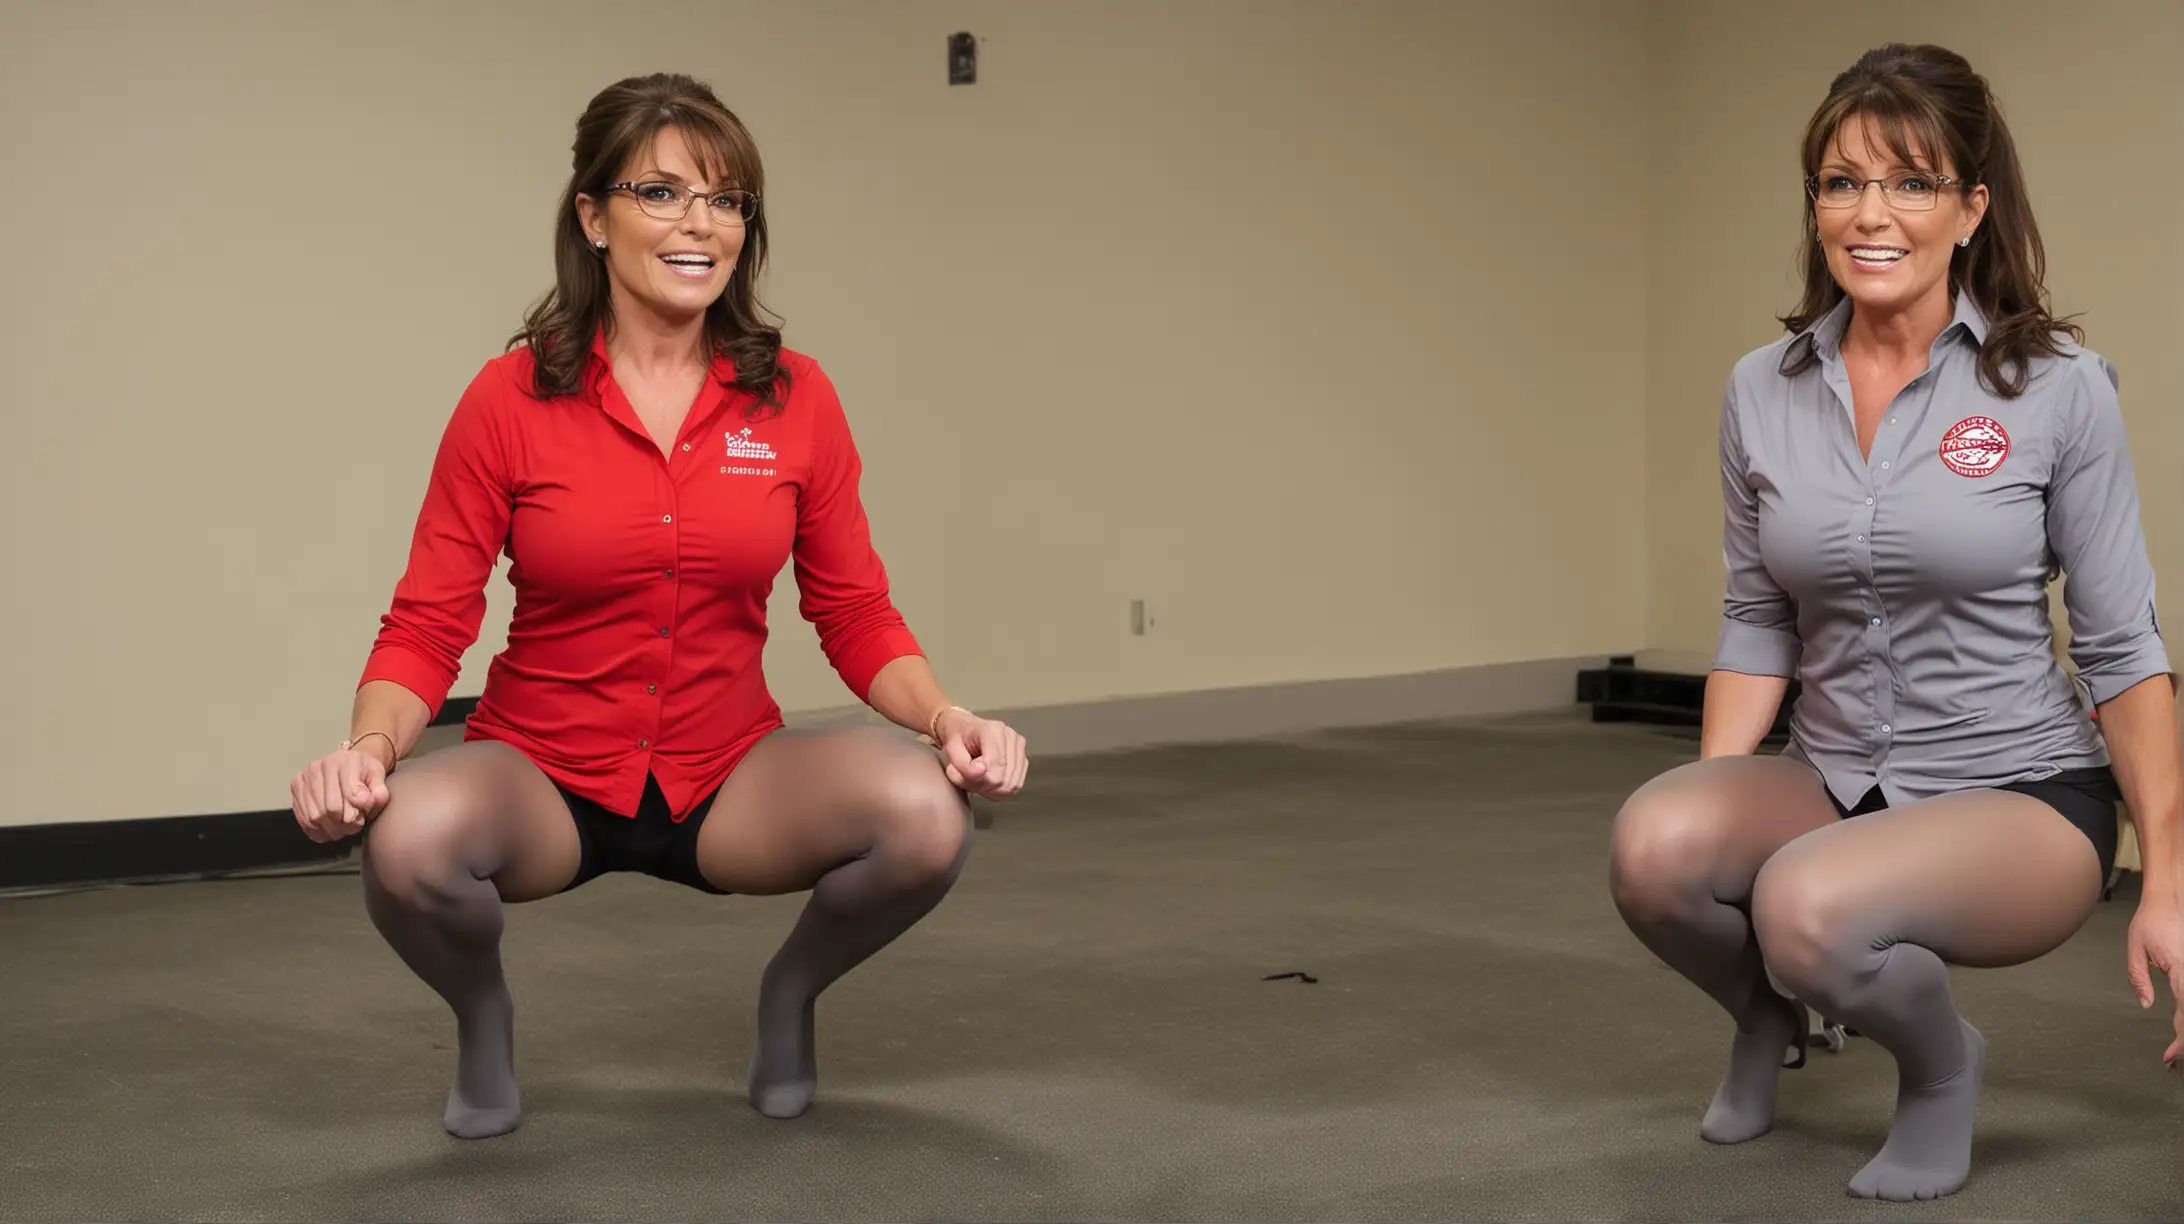 Sarah Palin and Lauren Boebert, both wearing untucked stretch red button down shirts, no pants, with gray pantyhose, squatting down in exercise class.